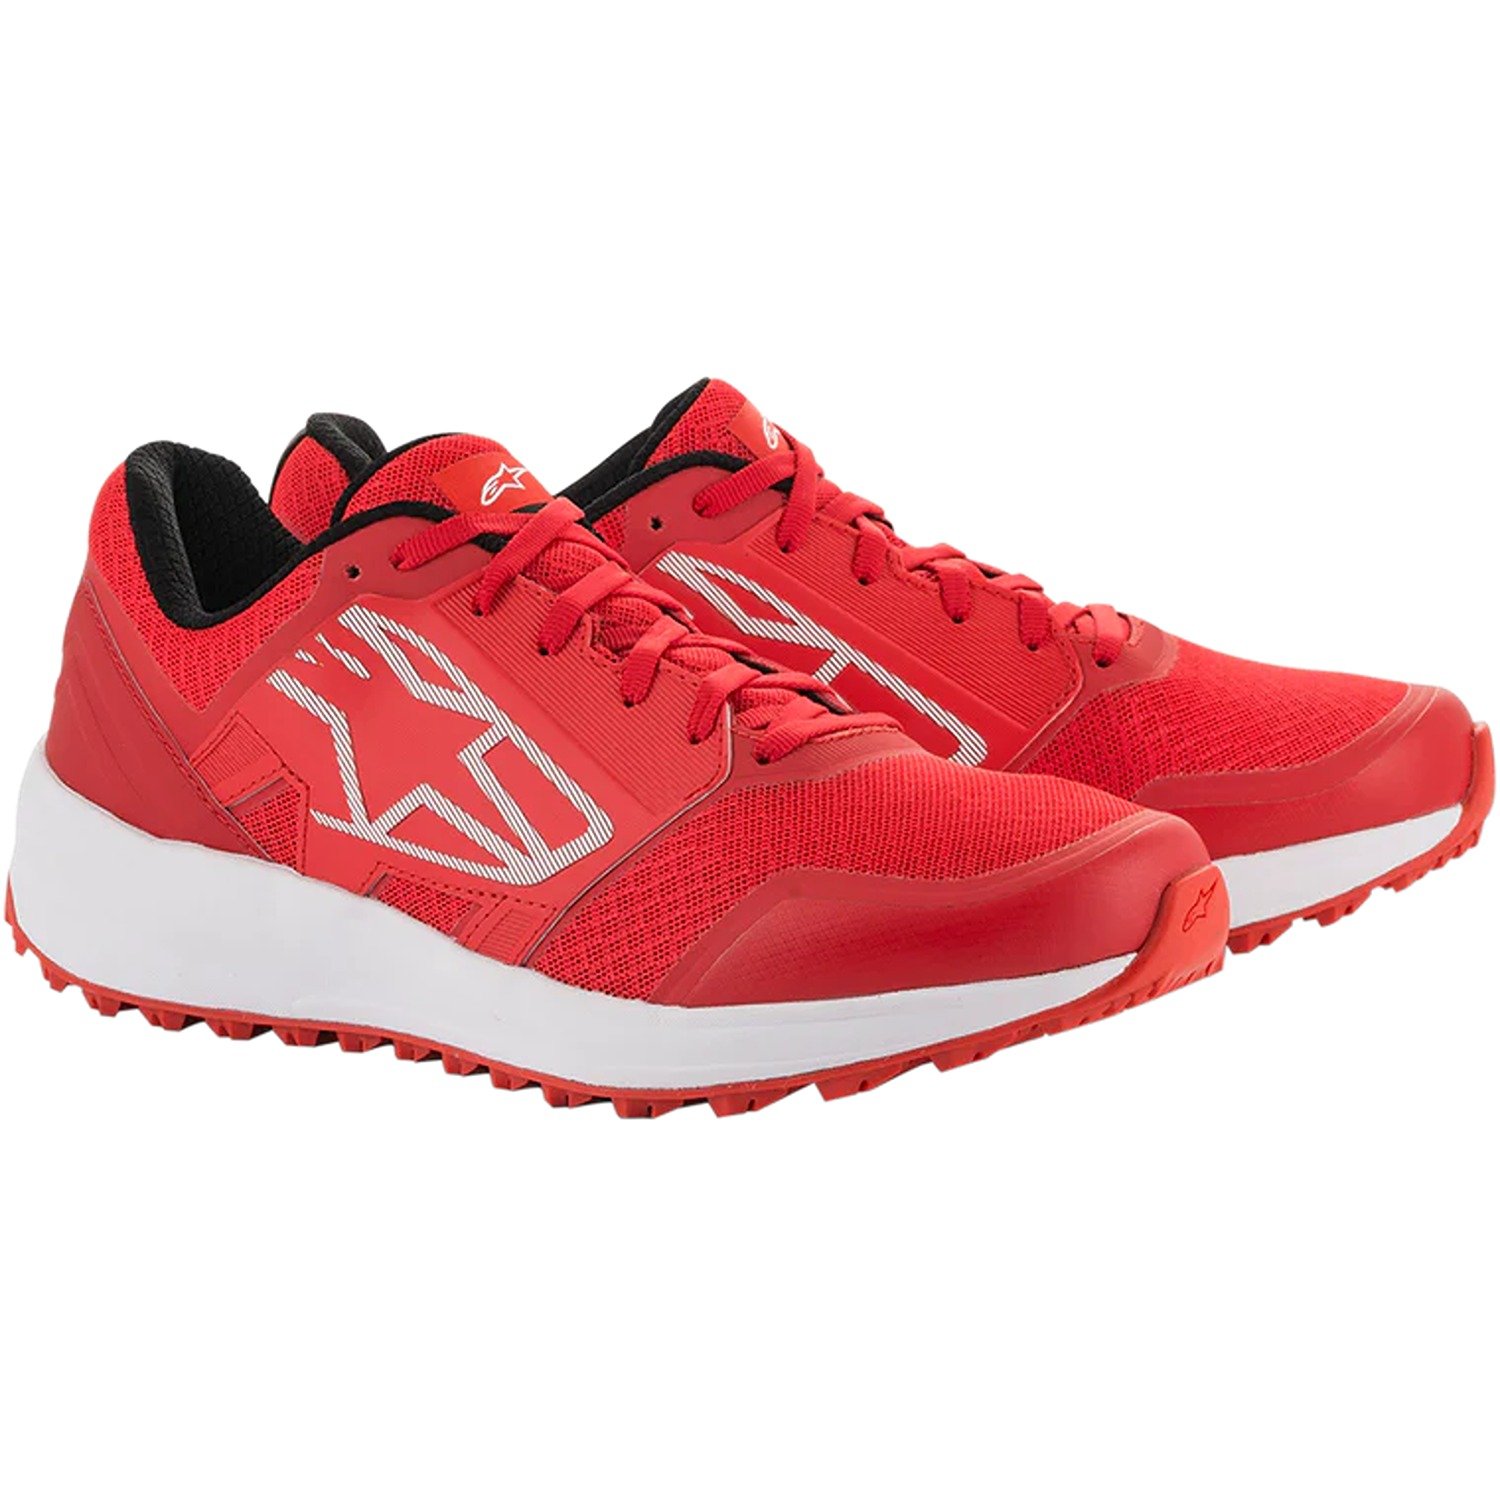 Image of Alpinestars Meta Trail Shoes Red White Taille US 55